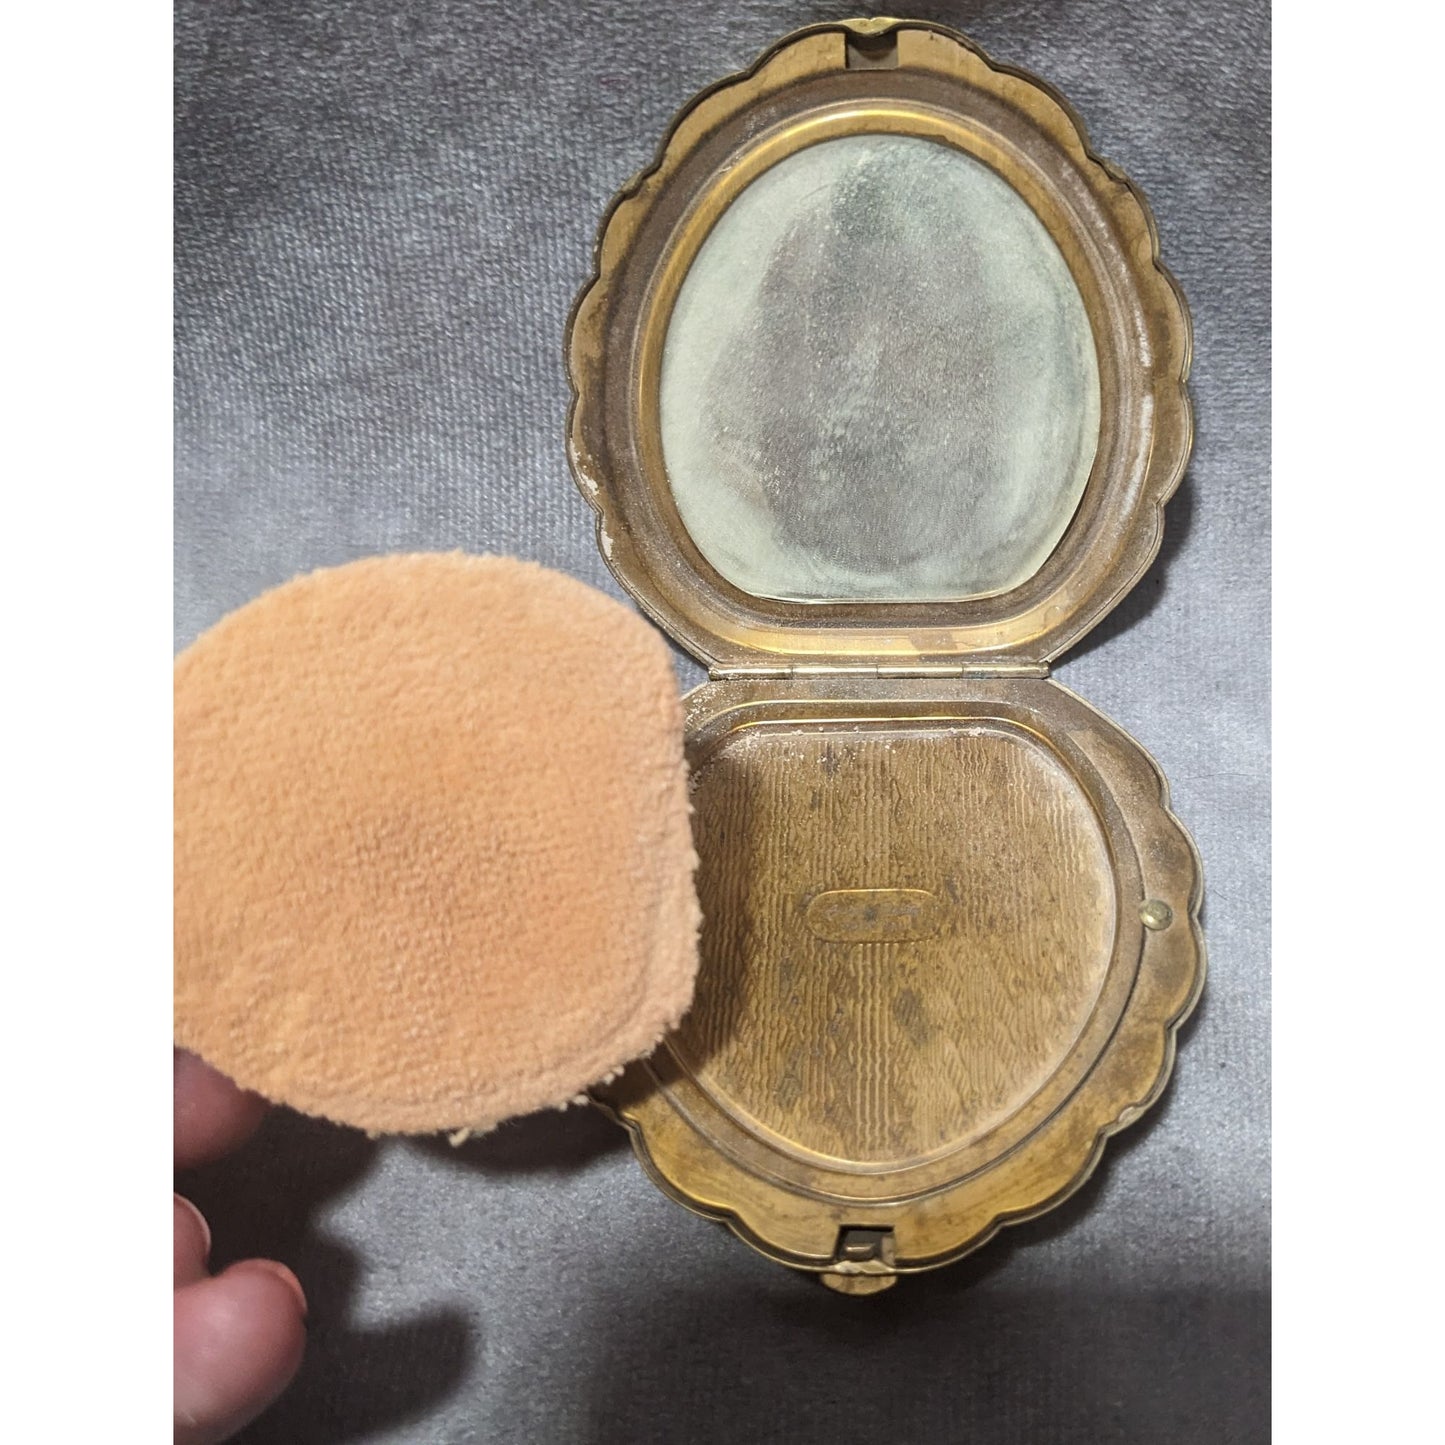 Vintage American Beauty Gold Scalloped Compact (Empty)